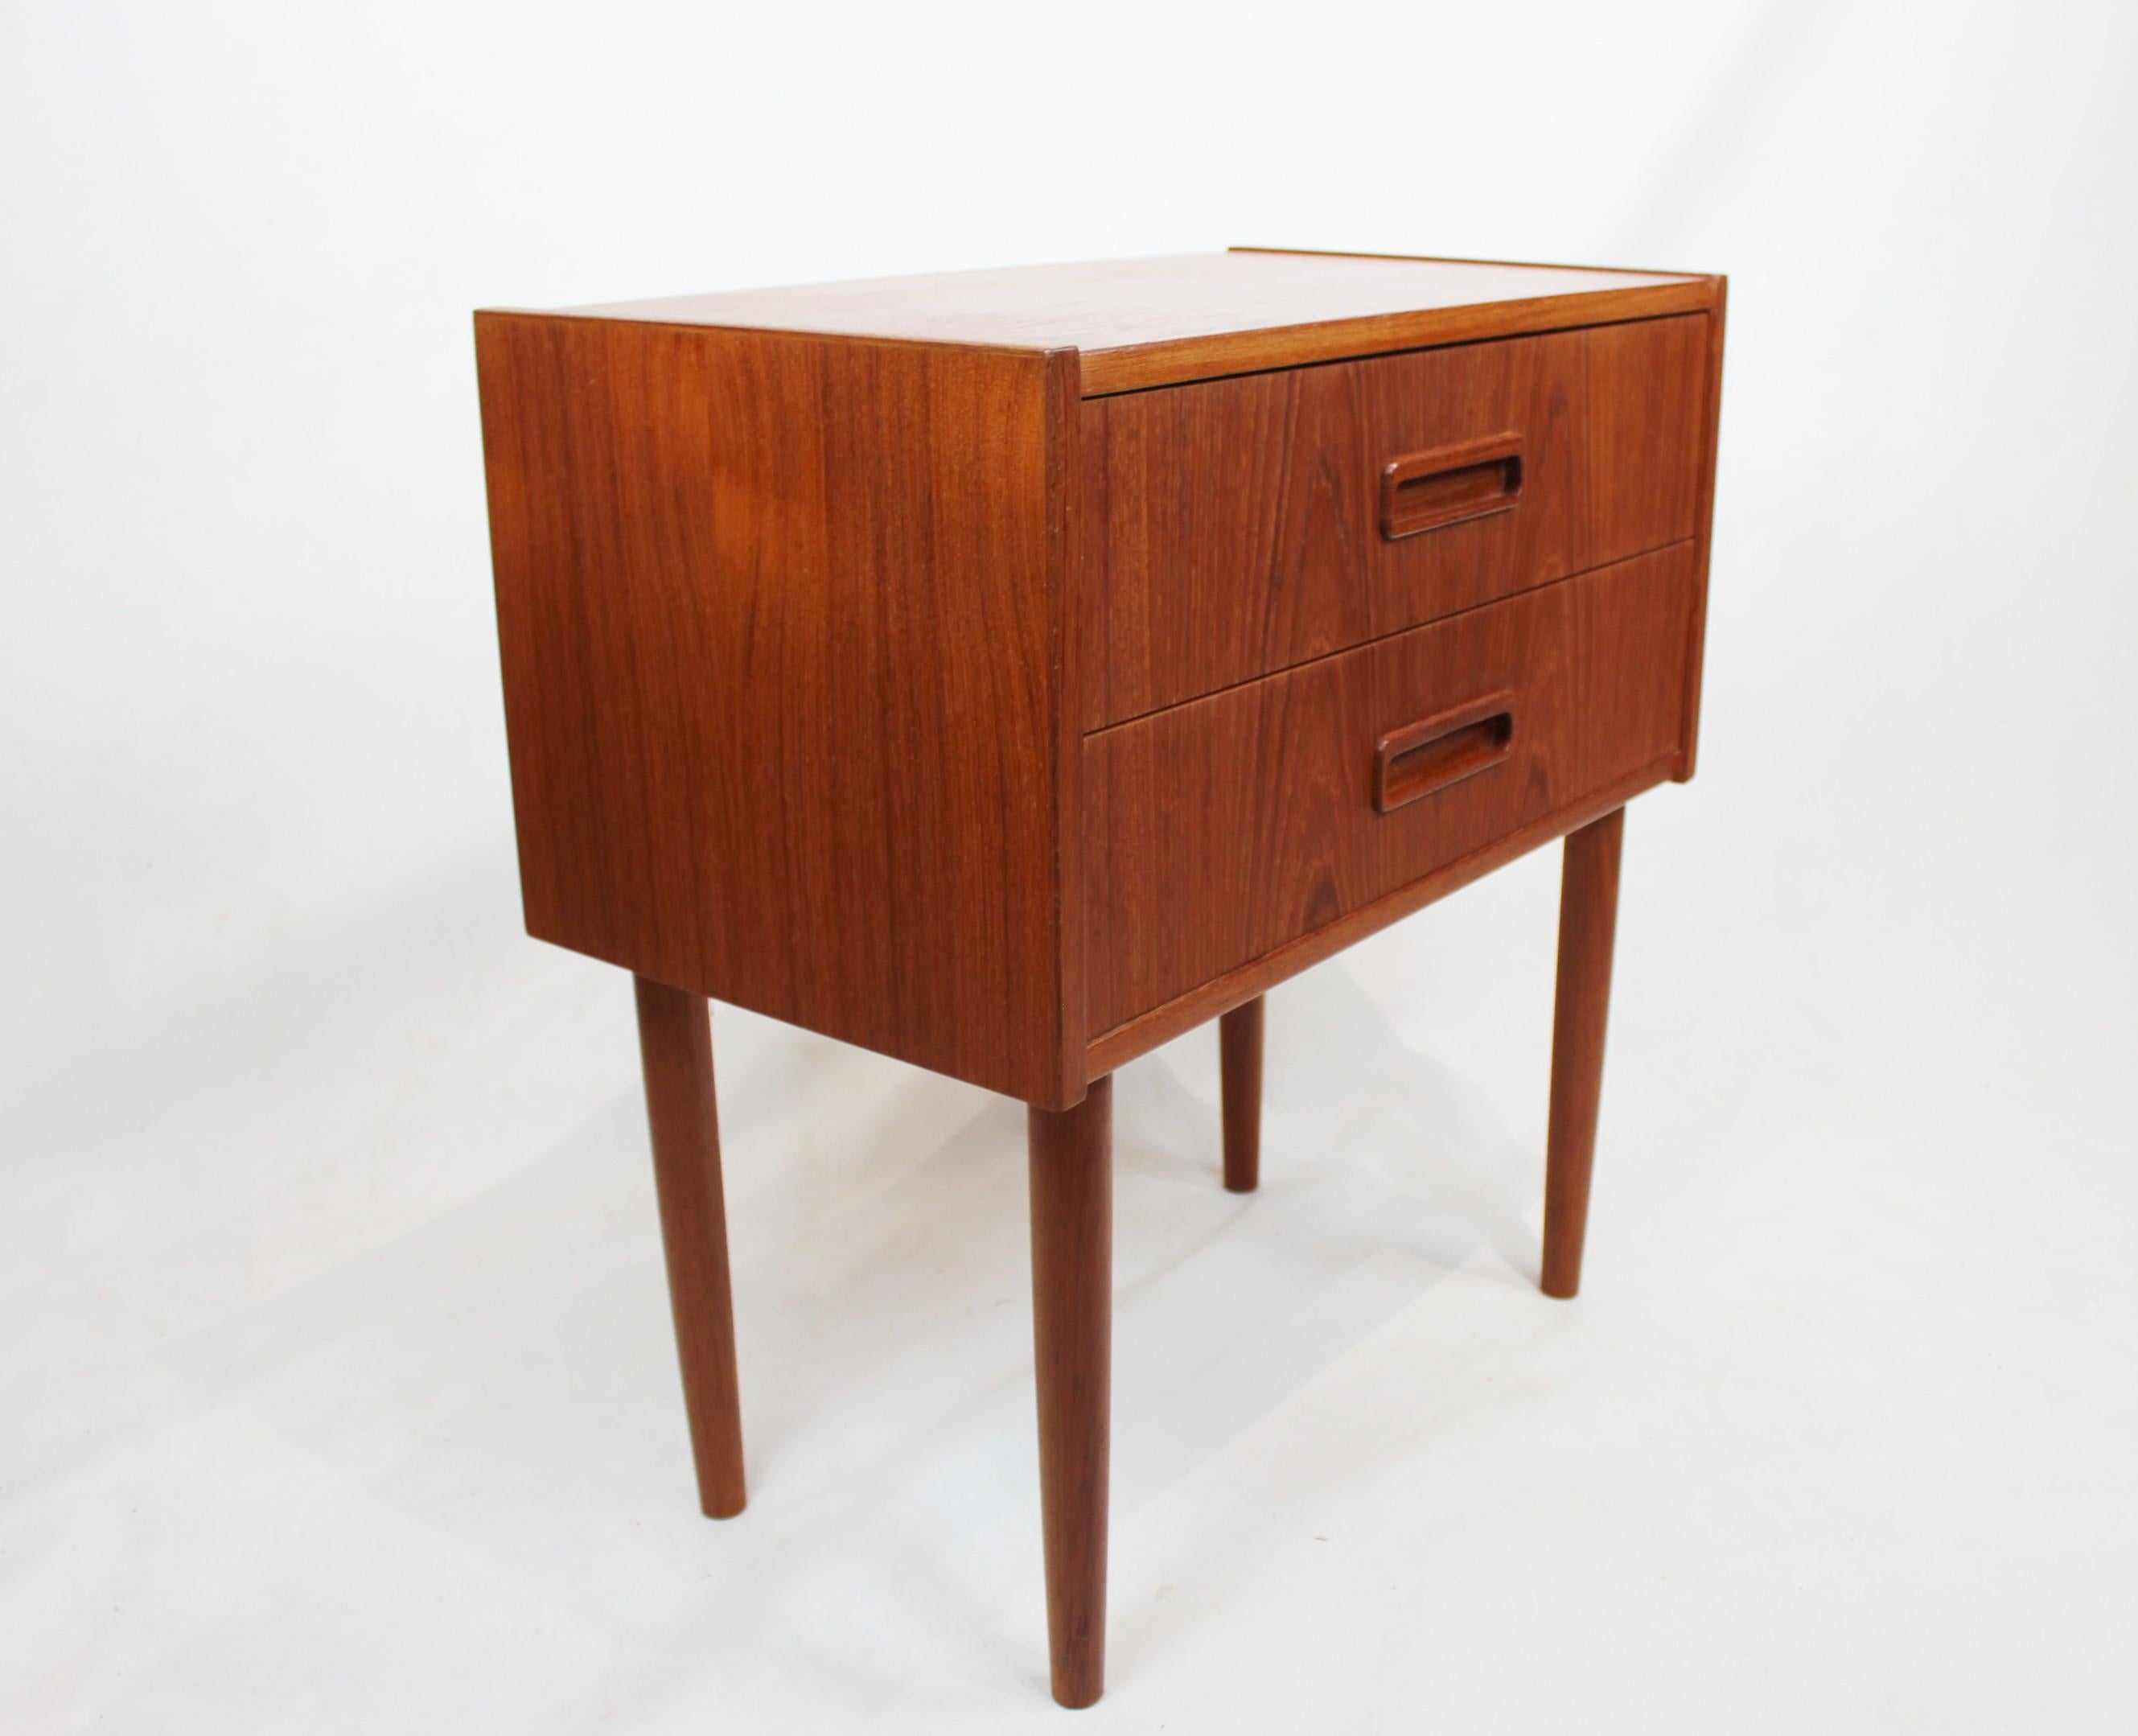 Small Chest of Drawers in Teak of Danish Design from the 1960s For Sale 1